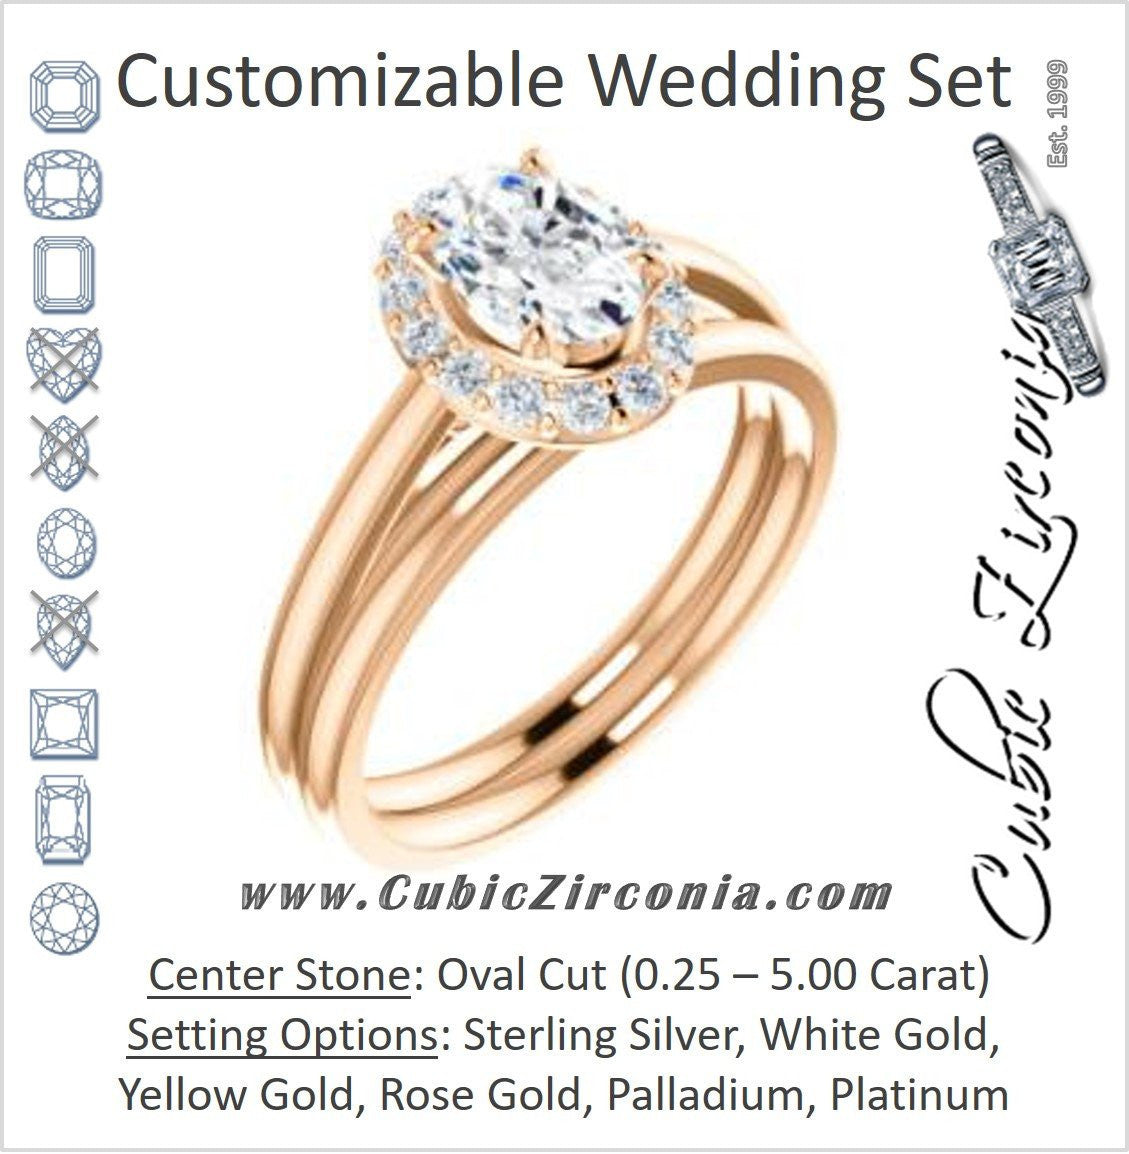 CZ Wedding Set, featuring The Tyra engagement ring (Customizable Cathedral-set Oval Cut Style with Halo, Decorative Trellis and Thin Band)